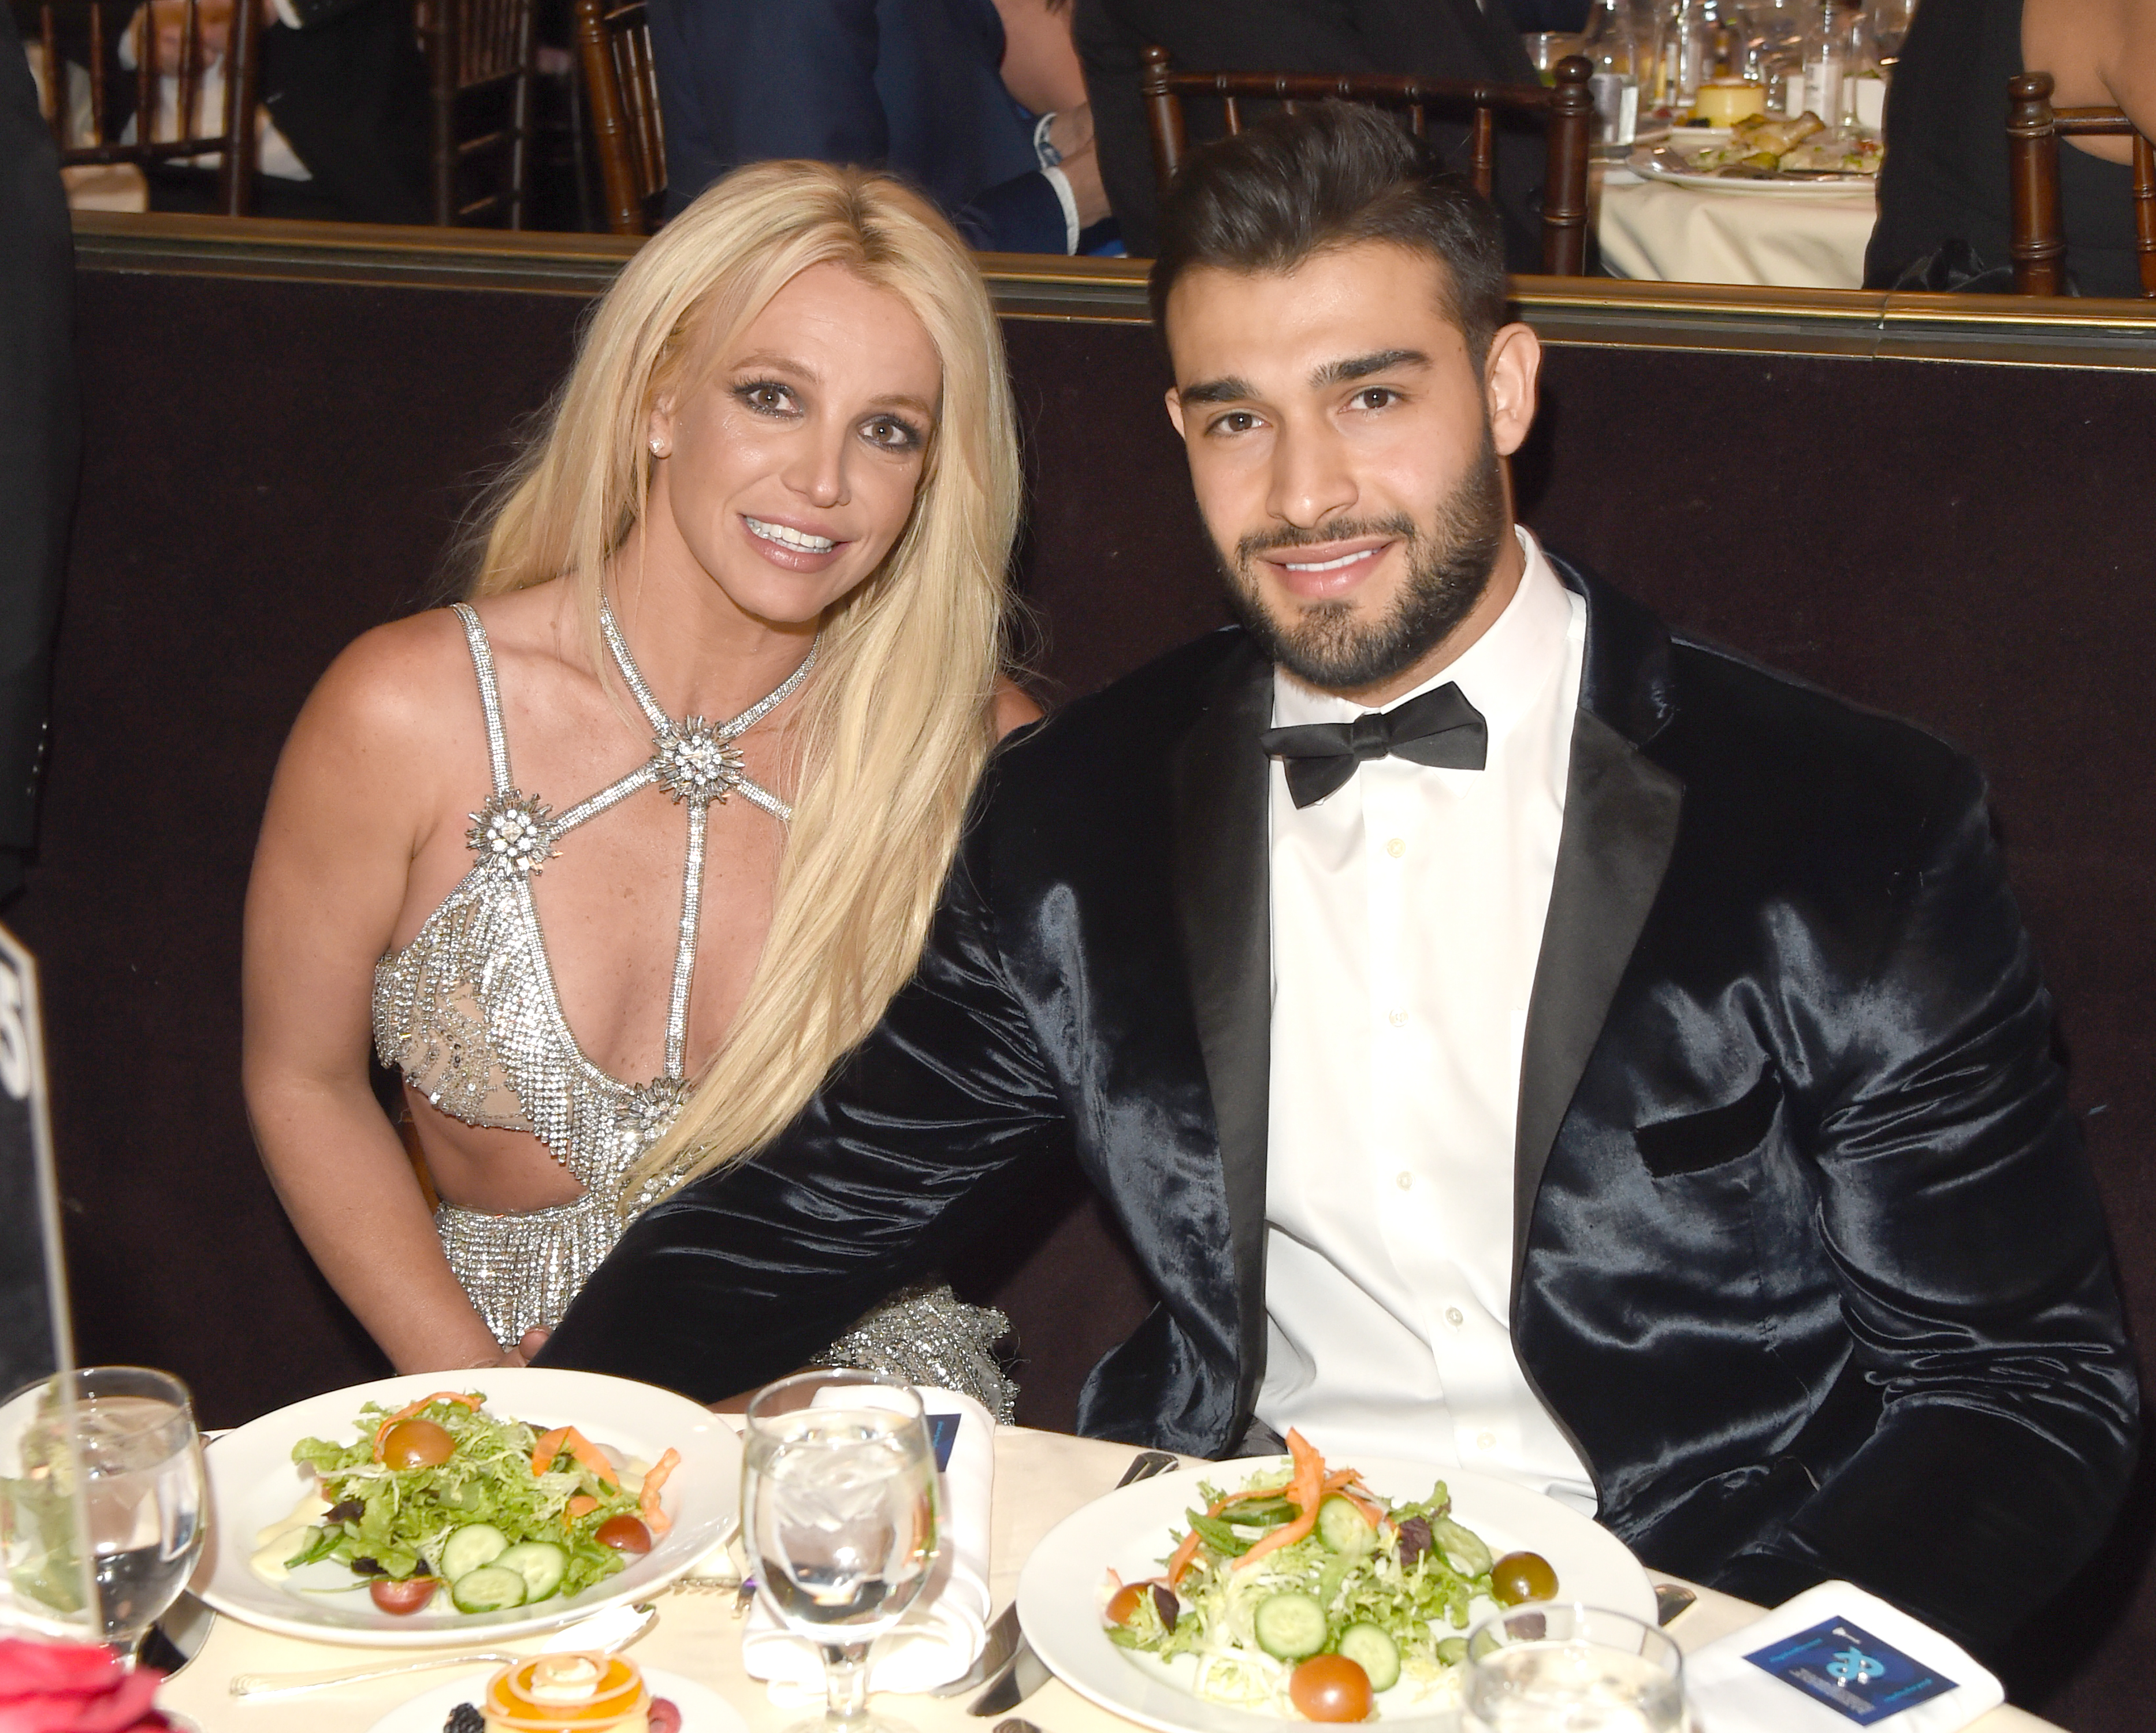 Britney's relationship with her sons has been on the rocks over the past few years, with them refusing to attend her wedding to Sam Asghari